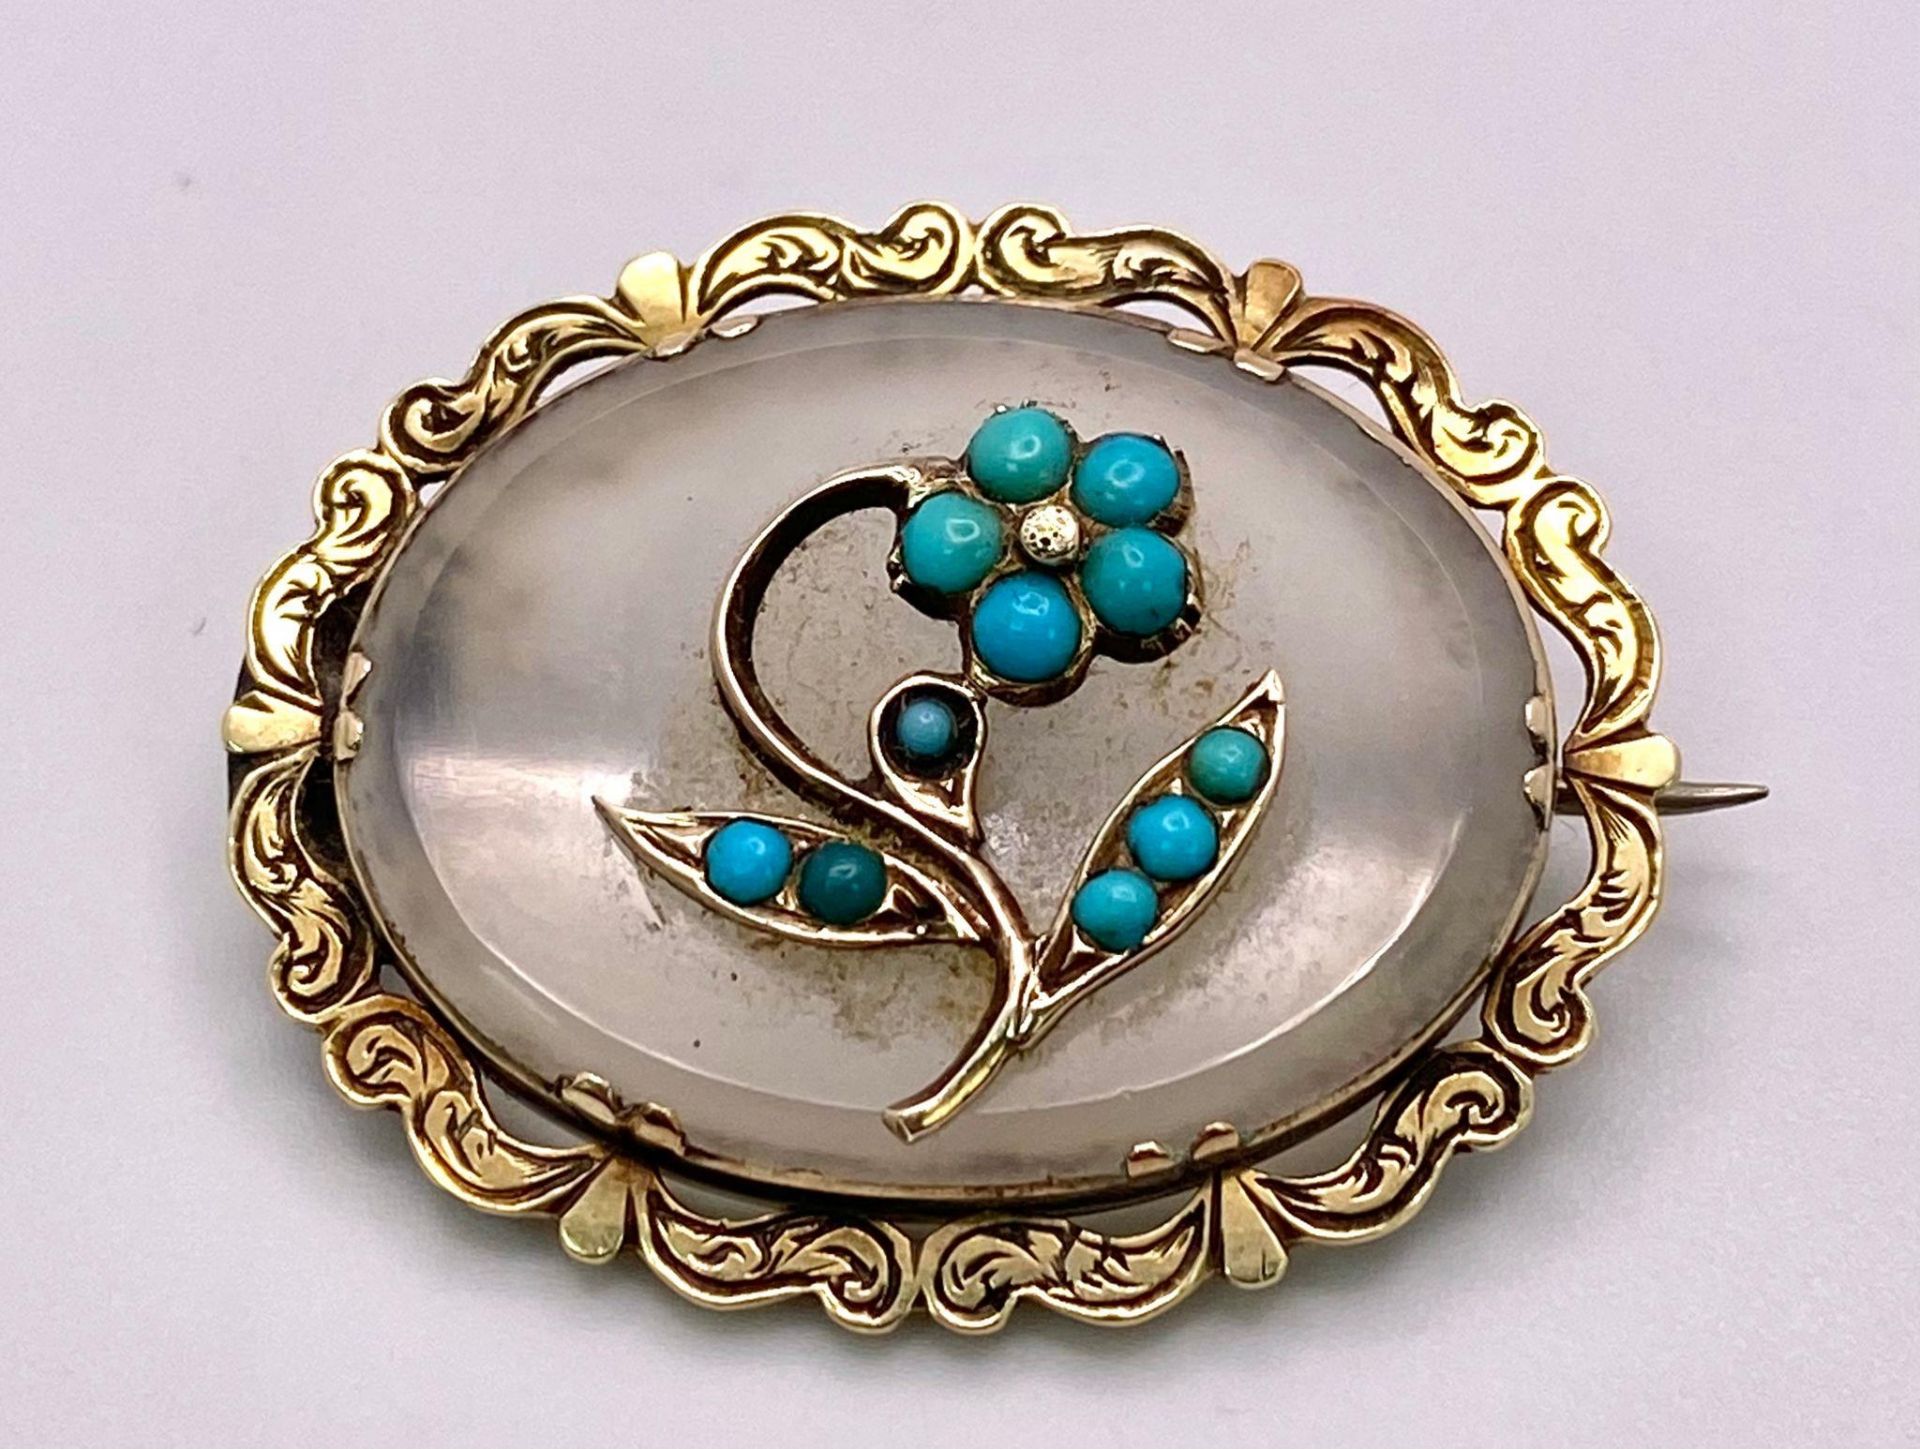 An Antique (Victorian) 15K Gold, Agate and Turquoise Brooch. 3cm. 5.95g total weight.